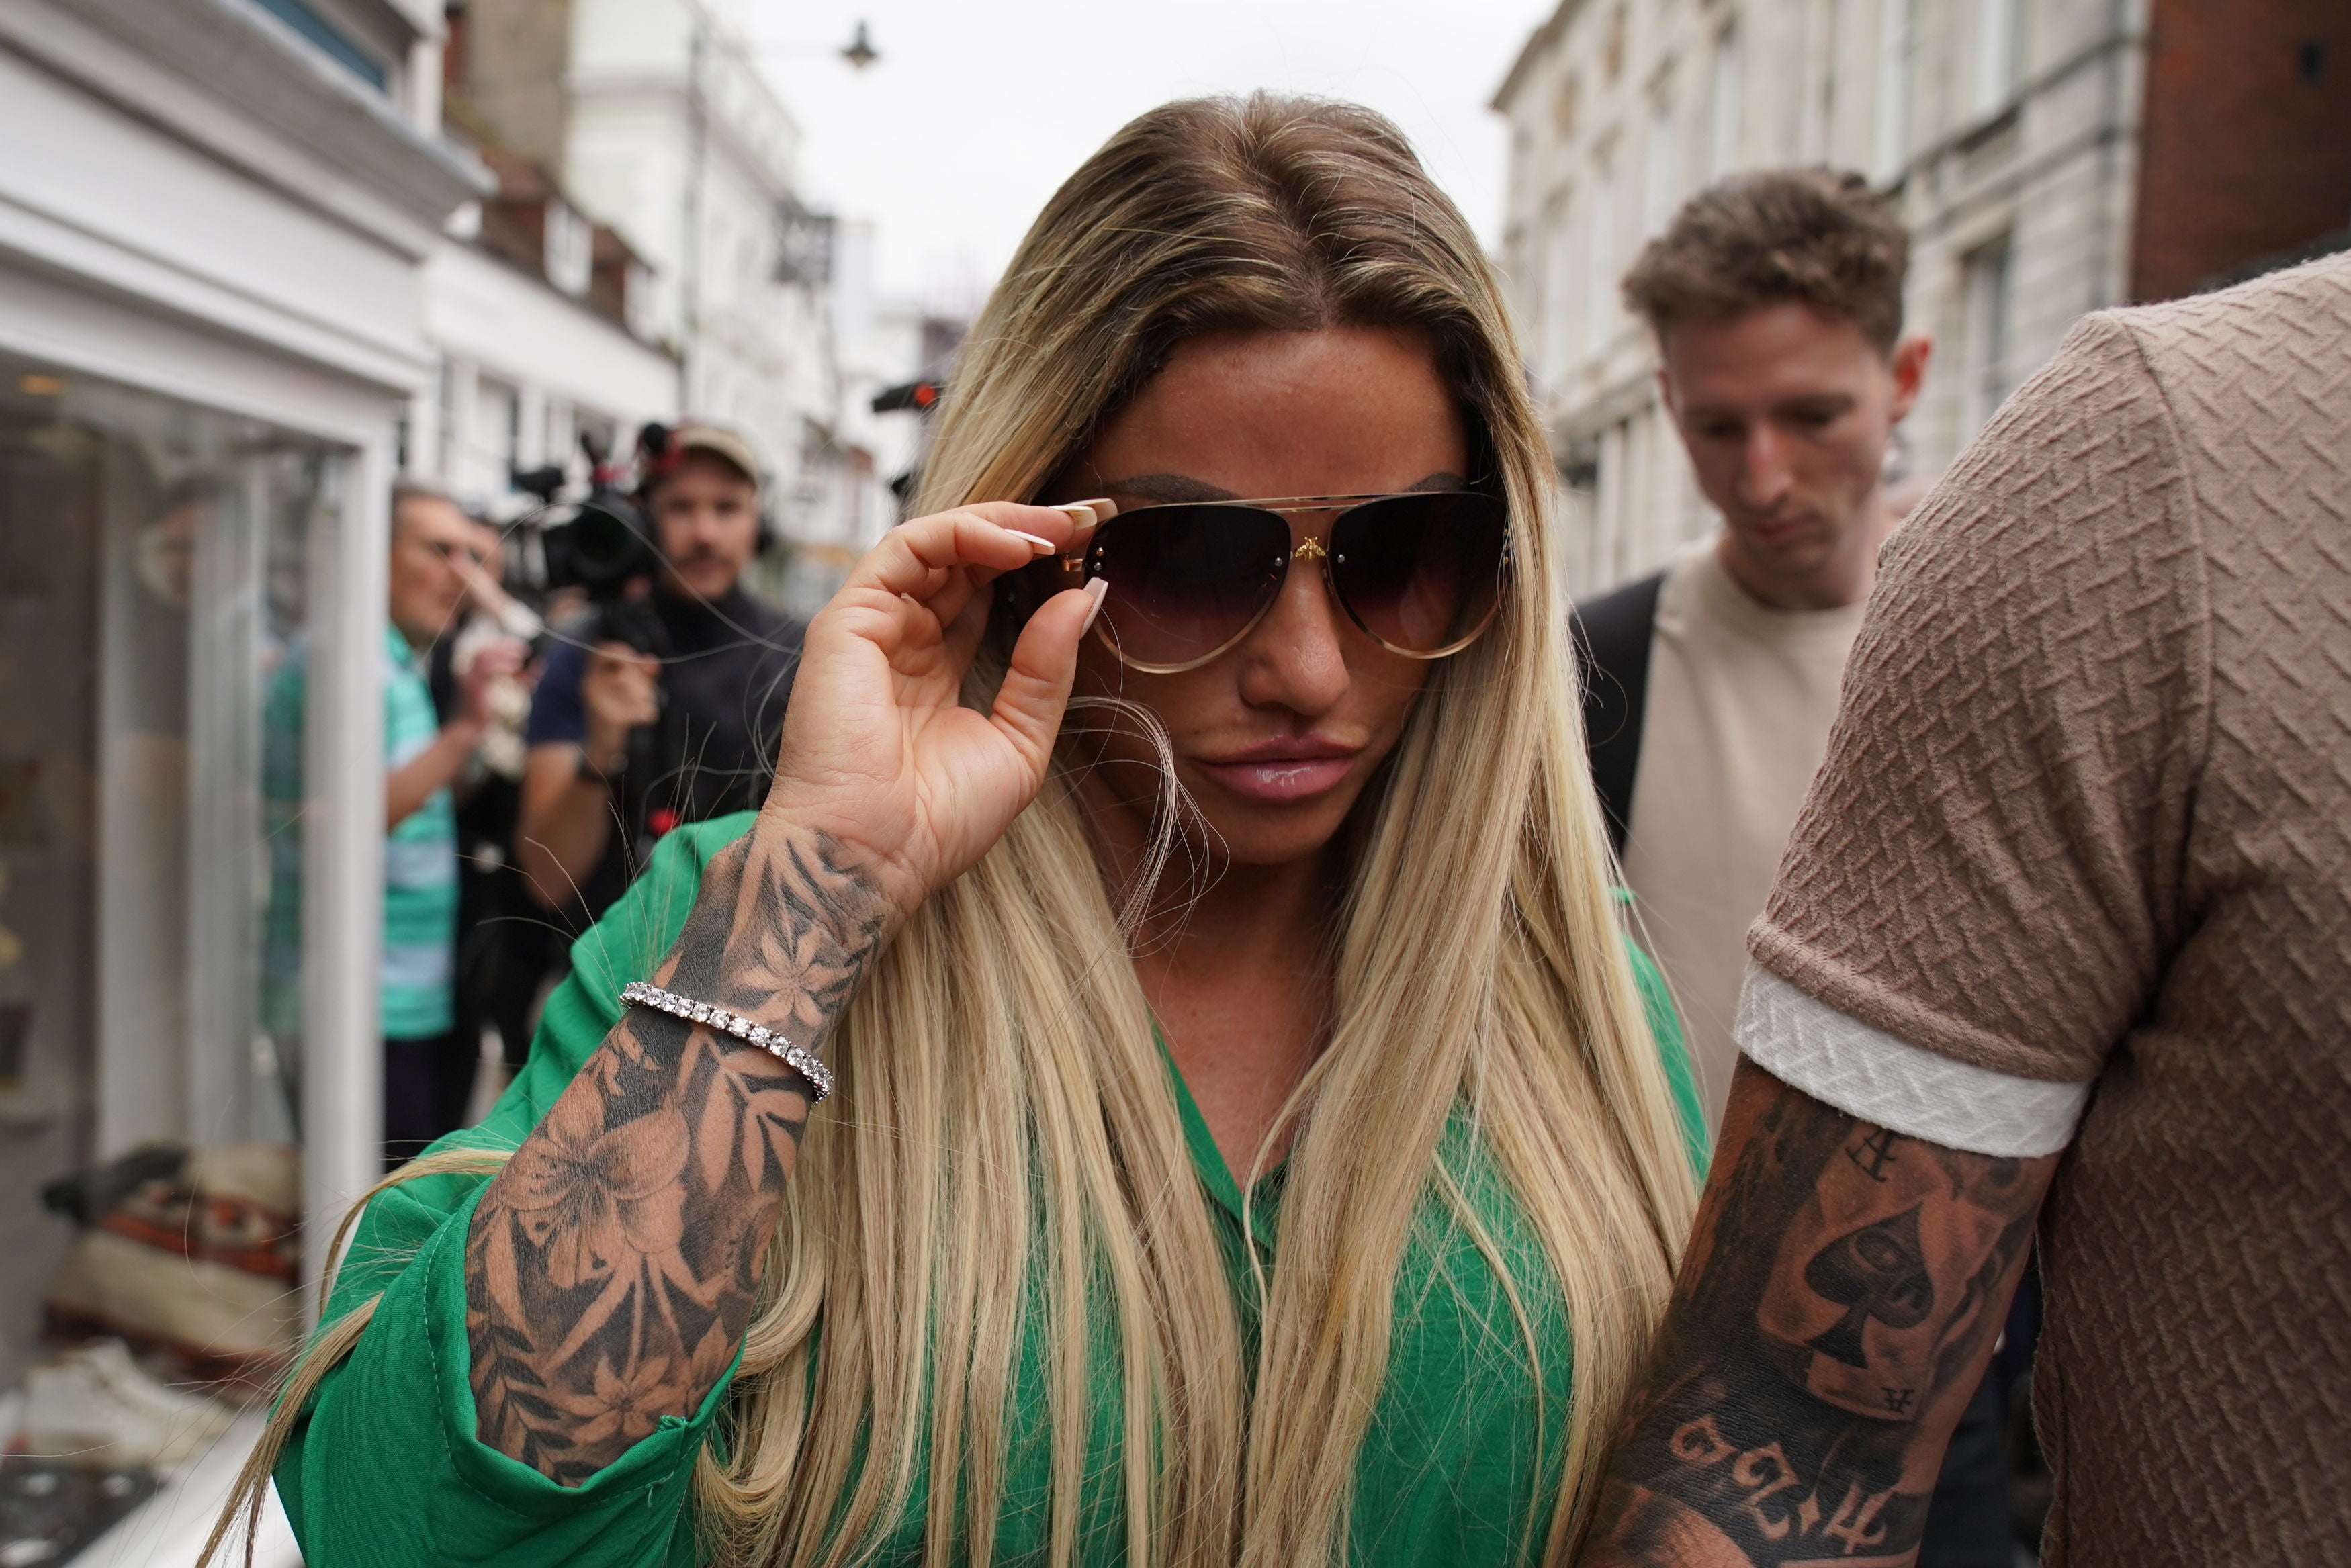 Katie Price had been banned from contacting Michelle Penticost